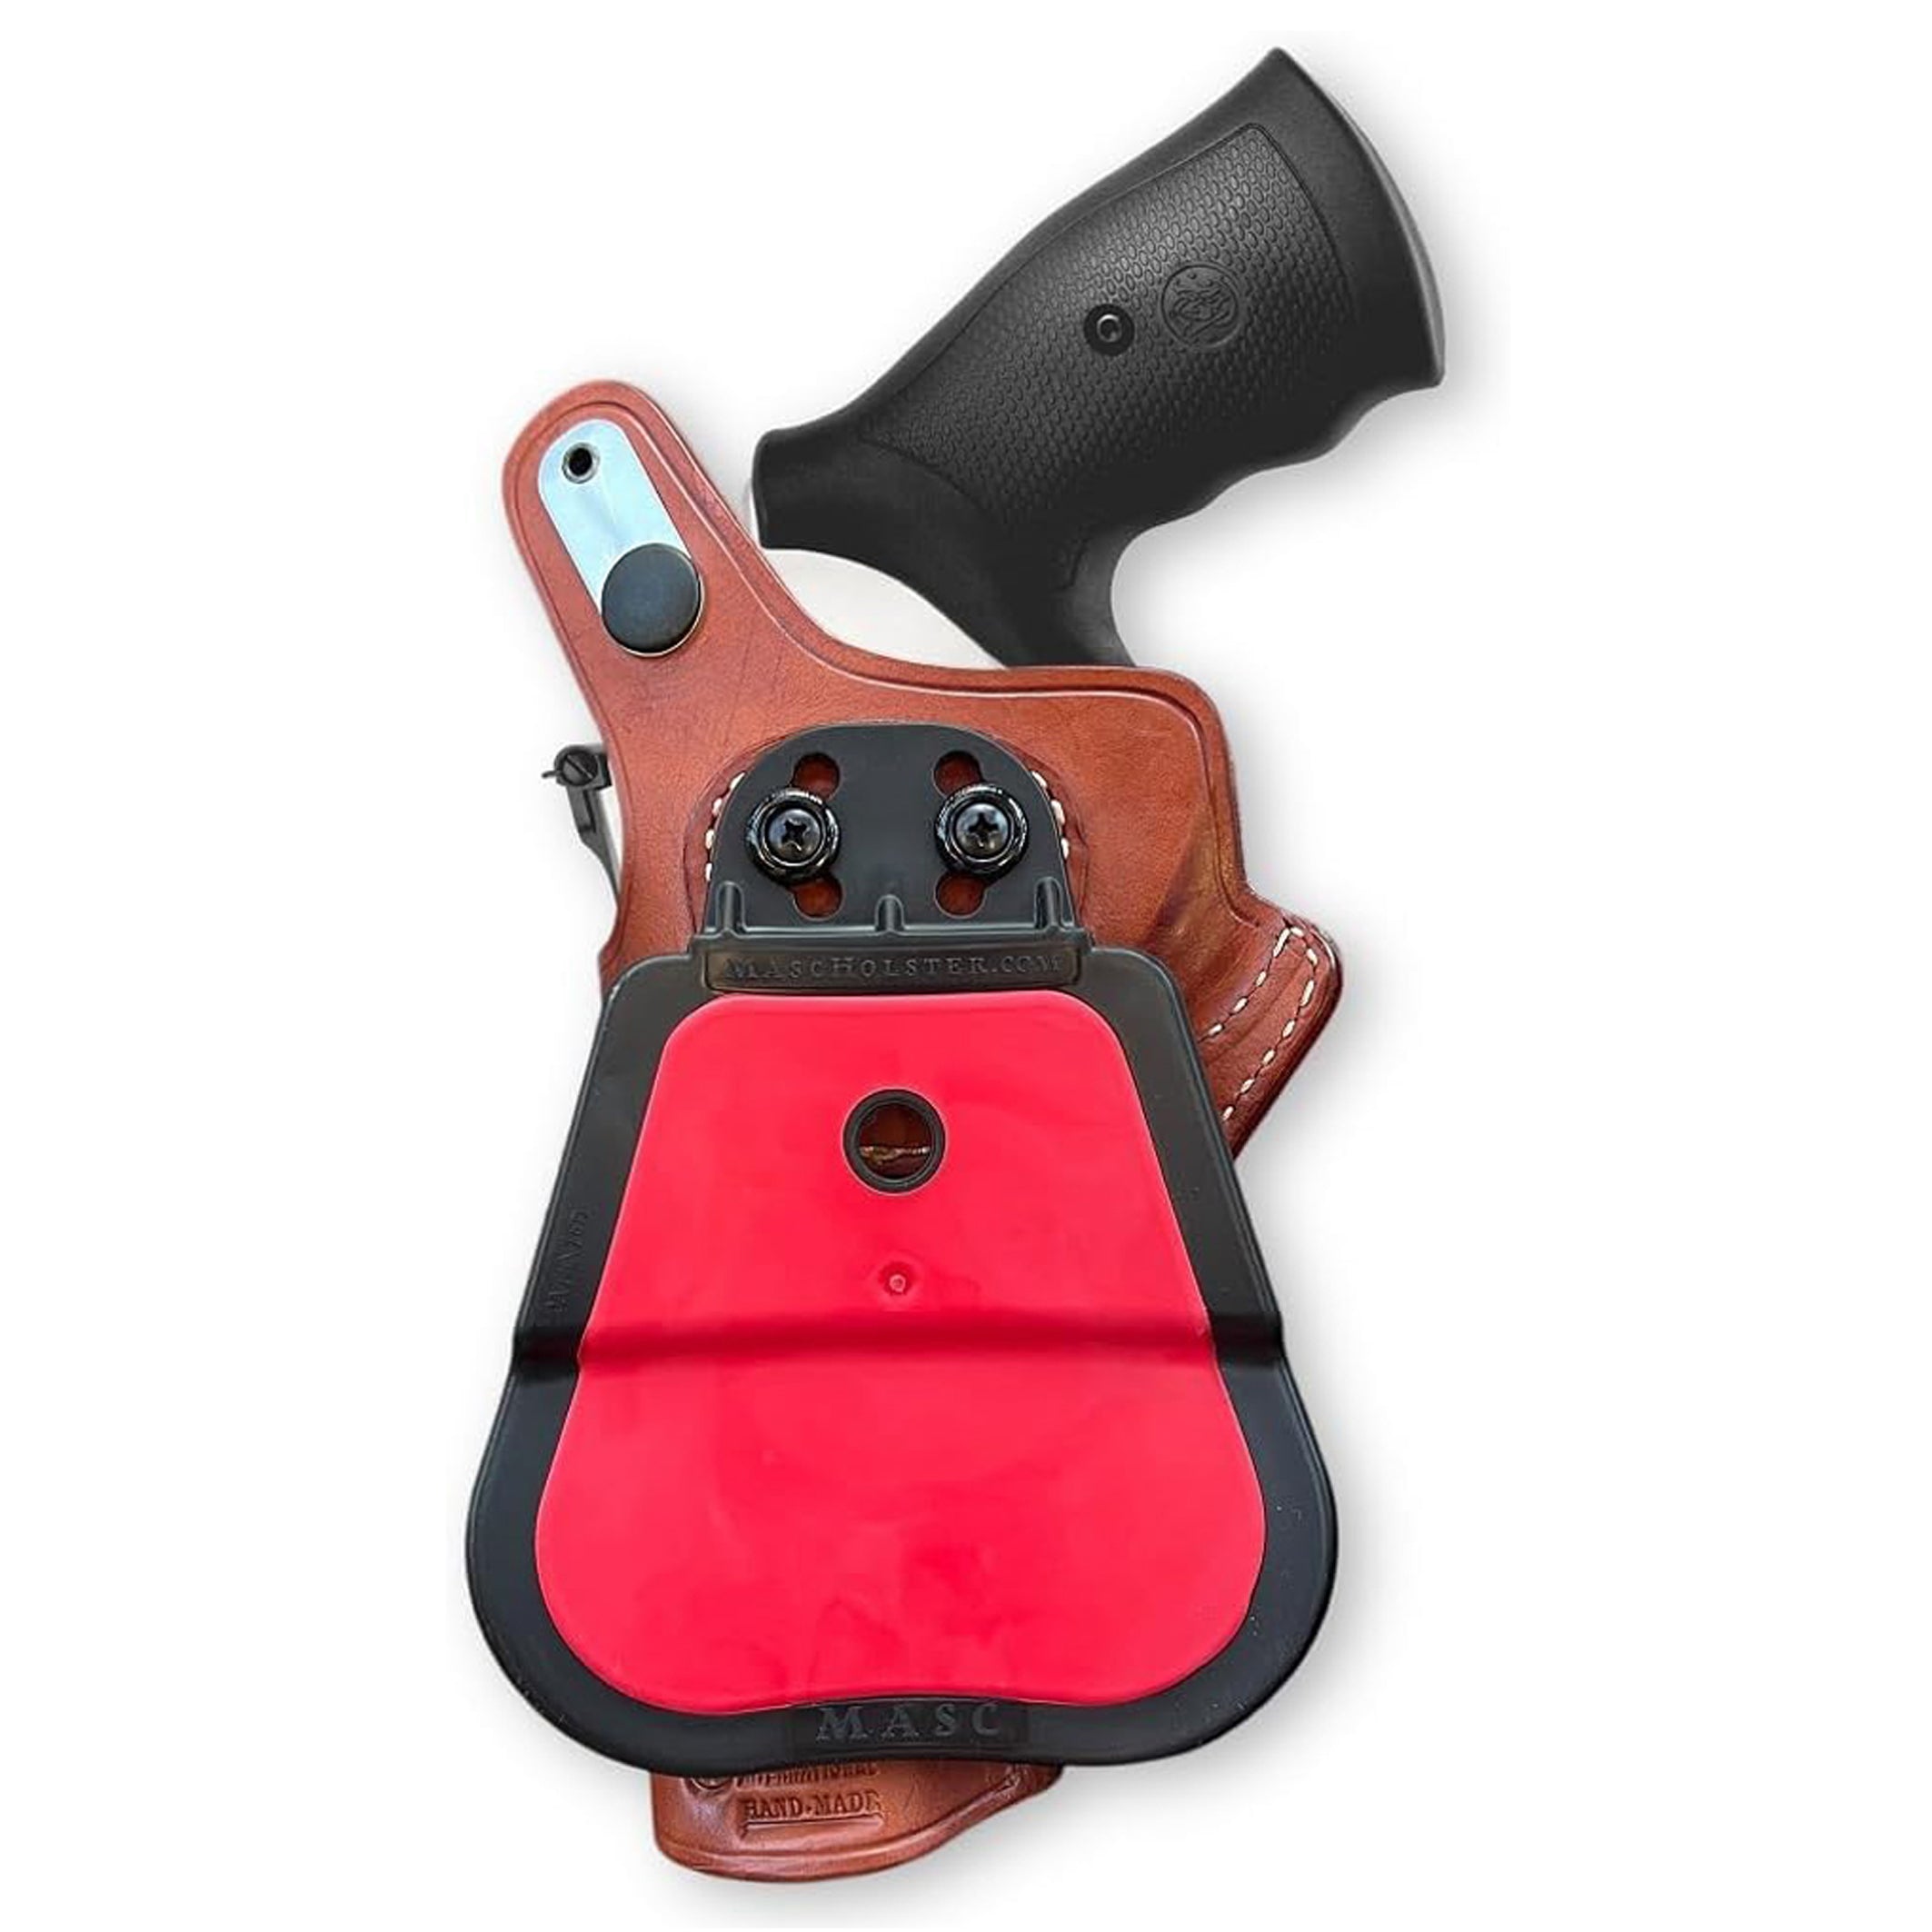 Premium Leather (OWB) Paddle Holster With Thumb Break For Revolvers